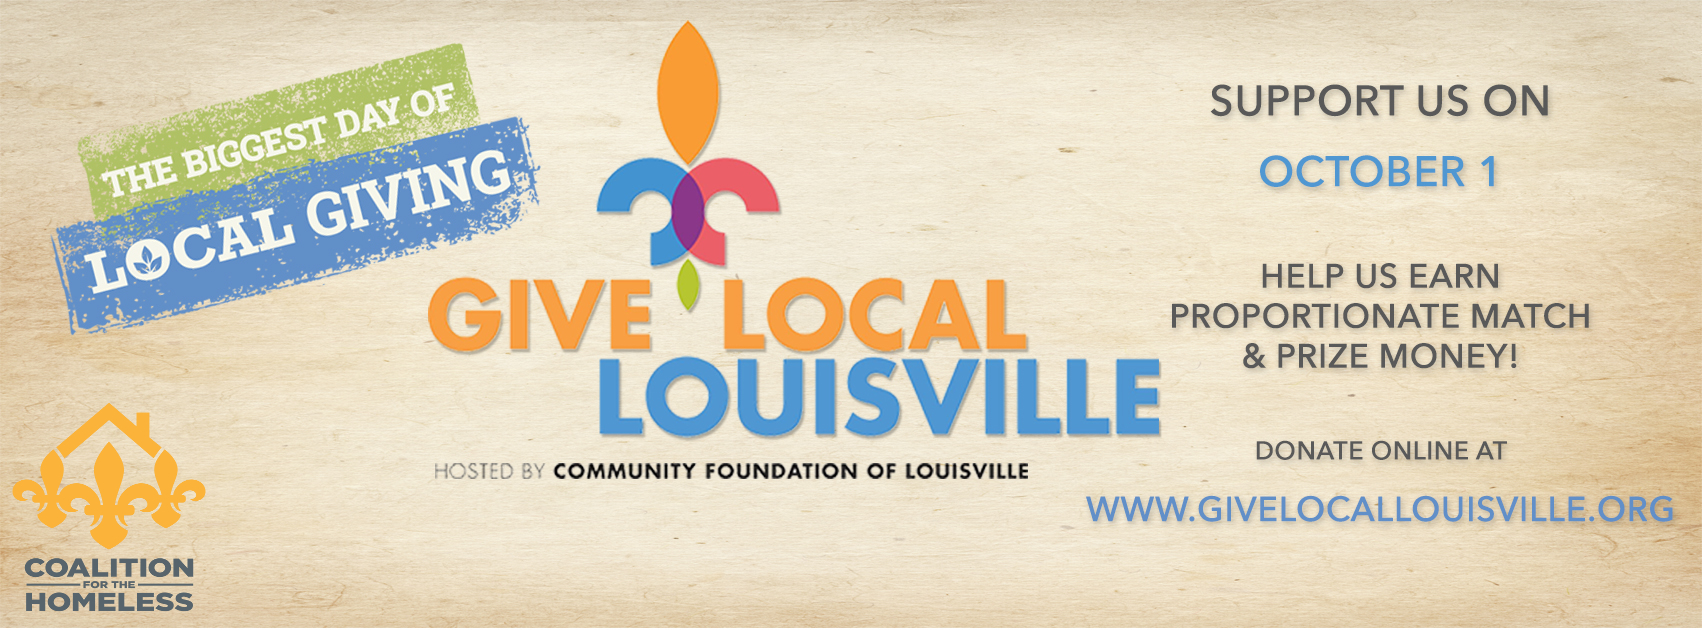 Give Local Louisville with logo